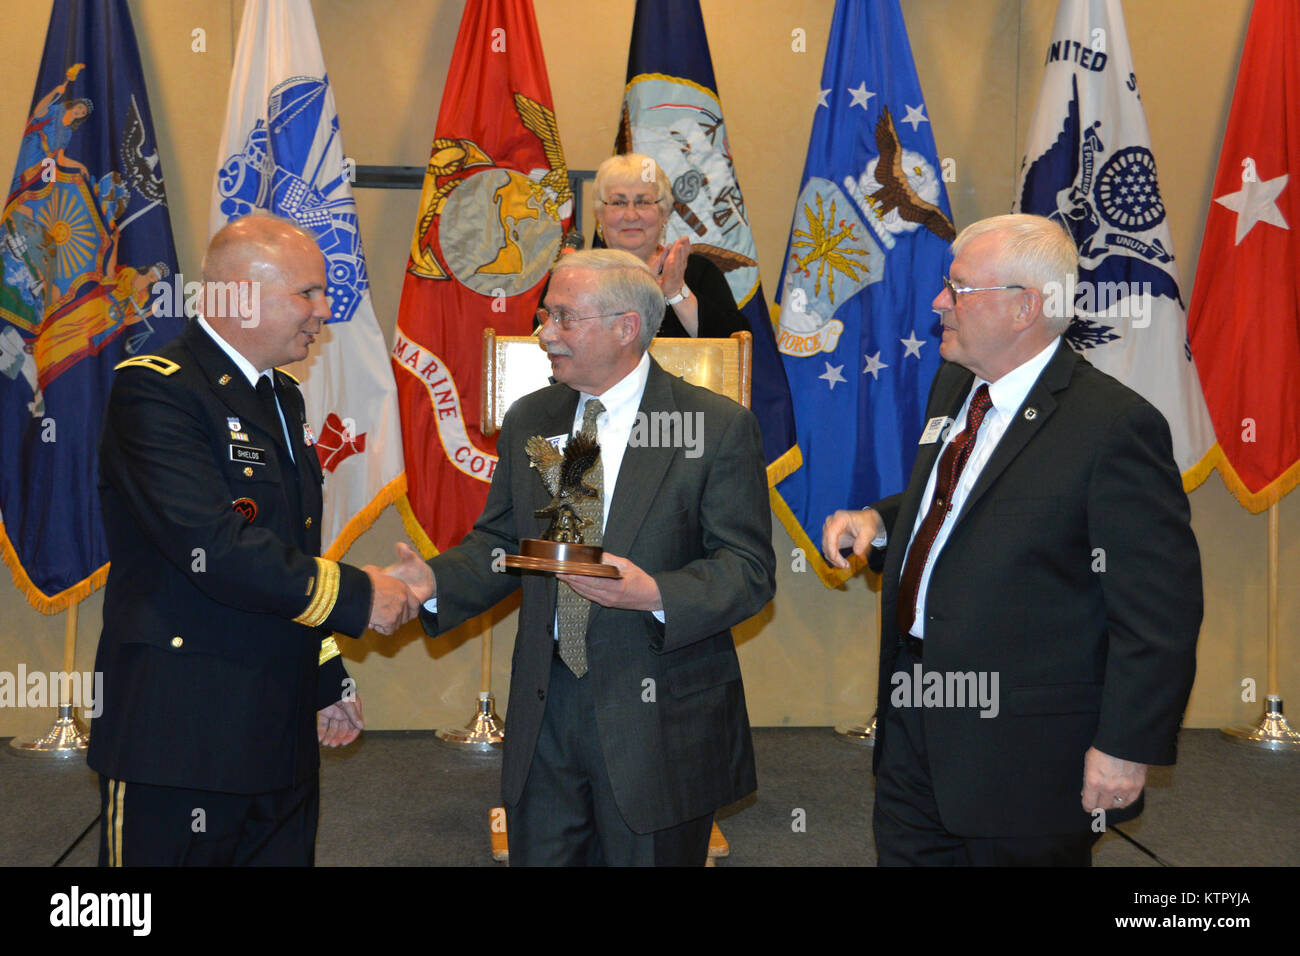 New York Army National Guard Commander Brig. Gen. Raymond Shields and New York State Employer Support of the Guard and Reserve Chairman Maj. Gen. (Ret.) Dennis Lutz present the ESGR’s Spirit of ESGR Award to Paul Geiss (center), a volunteer from central New York during the ESGR 2016 Awards Banquet in Albany, Apr. 26.  The Spirit of ESGR Award is presented to a volunteer who exemplifies the program and who has displayed the highest level of volunteer service. (U.S. Army National Guard photo by: Sgt. Major Corine Lombardo/RELEASED) Stock Photo